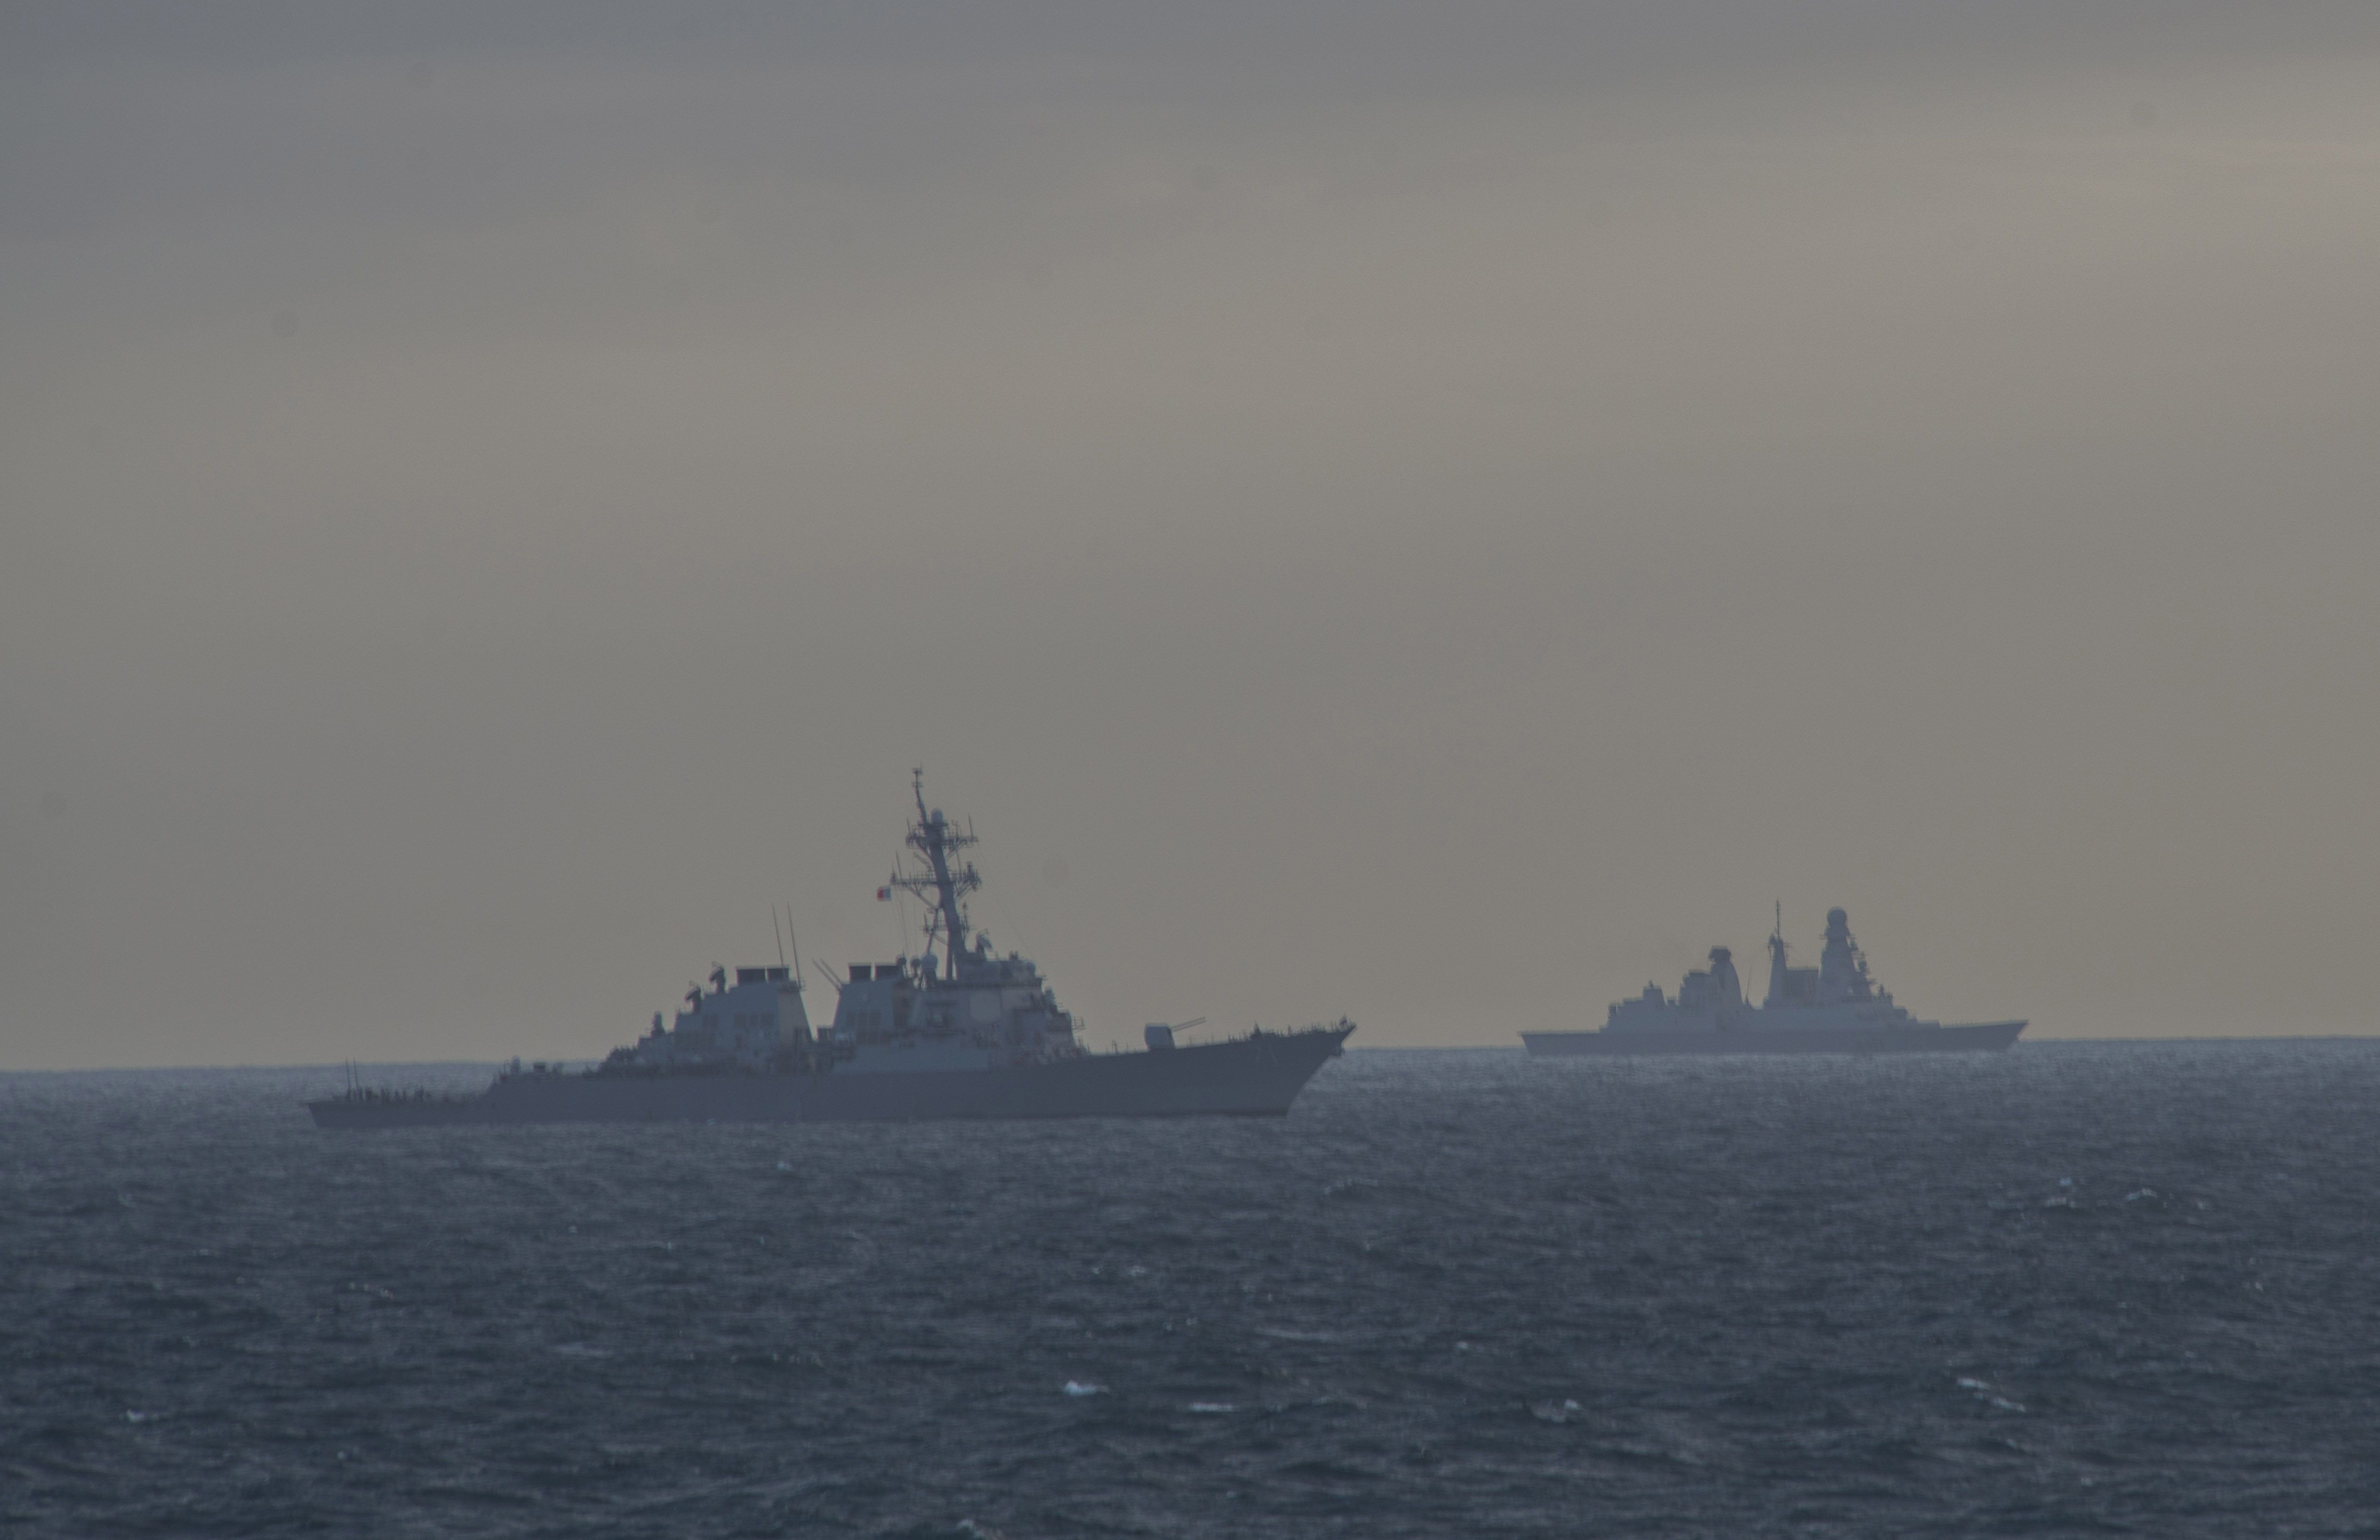 Arleigh Burke-class guided-missile destroyer USS Ross (DDG-71) and Andrea Doria-class Italian destroyer DDGHM Andrea Doria transit with guided-missile destroyer USS The Sullivans (DDG 68) during At Sea Demonstration 2015 (ASD 15) Oct. 22, 2015. US Navy photo.